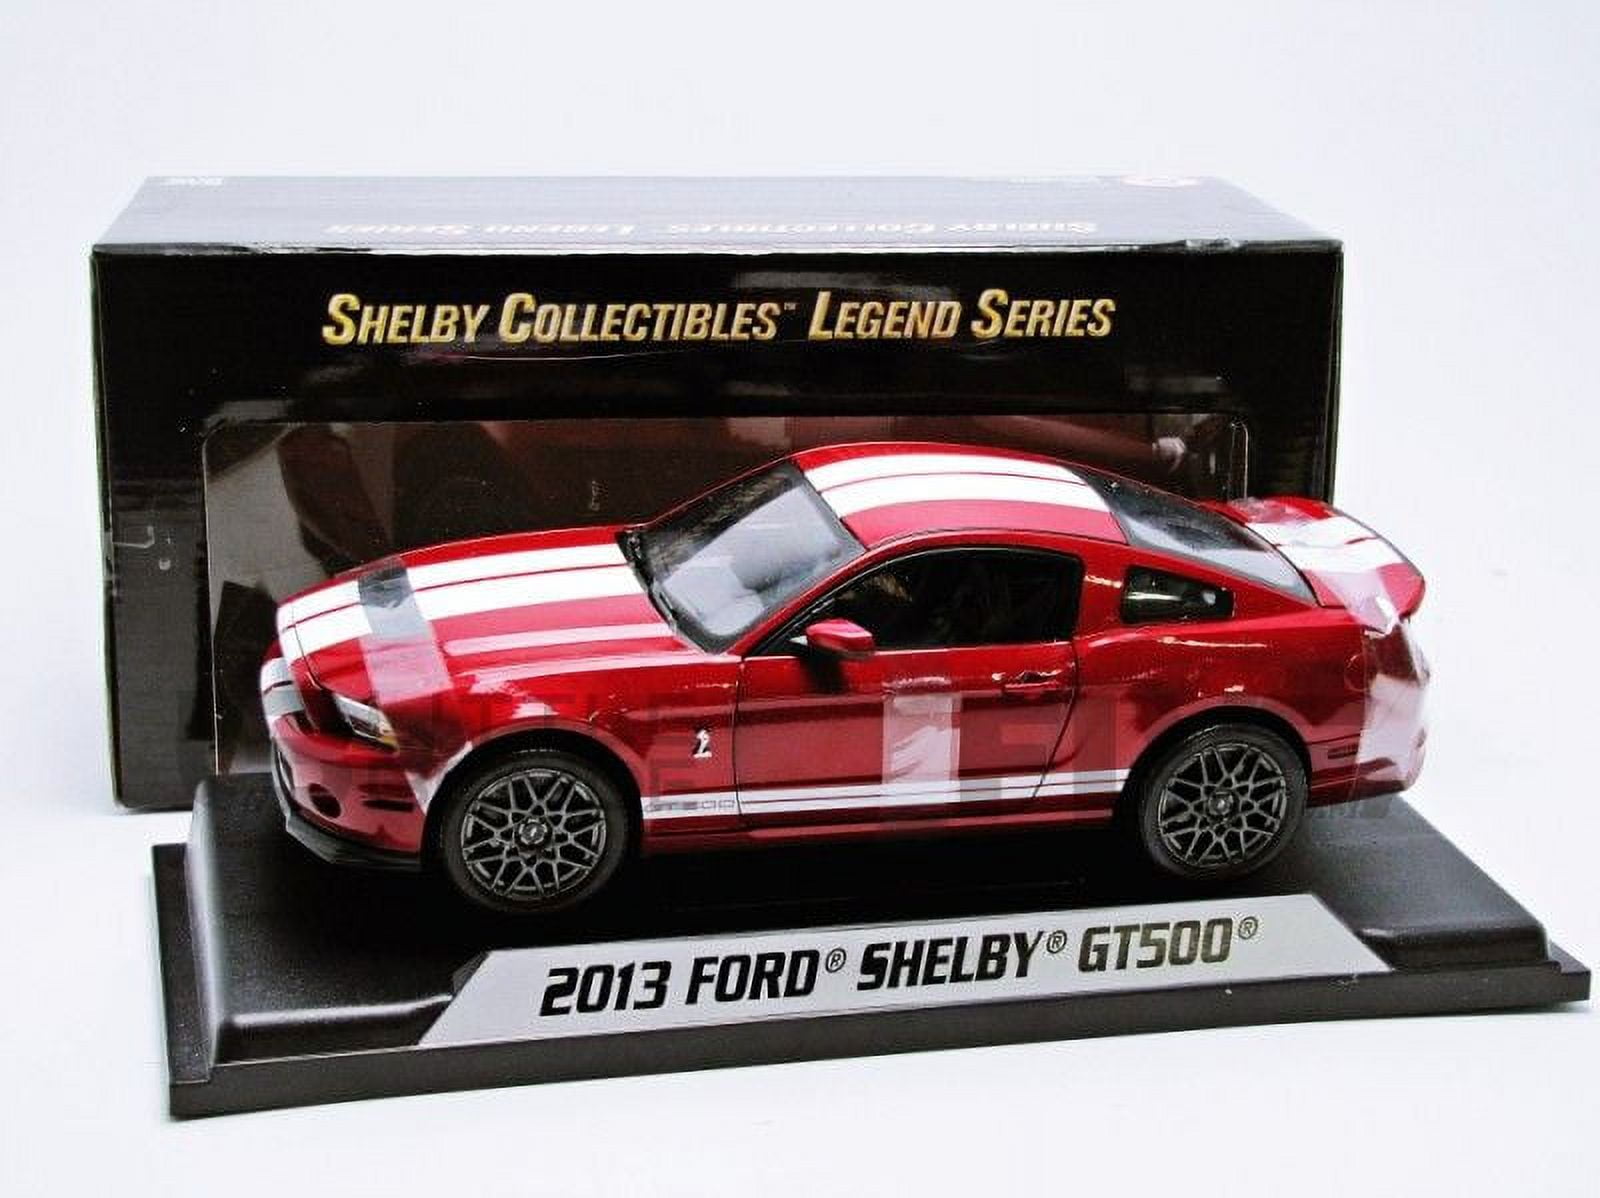 SC396 Metallic Red with White Stripes 1 by 18 Scale Diecast Model Car for 2013 Ford Shelby Mustang GT500 -  SHELBY COLLECTIBLES